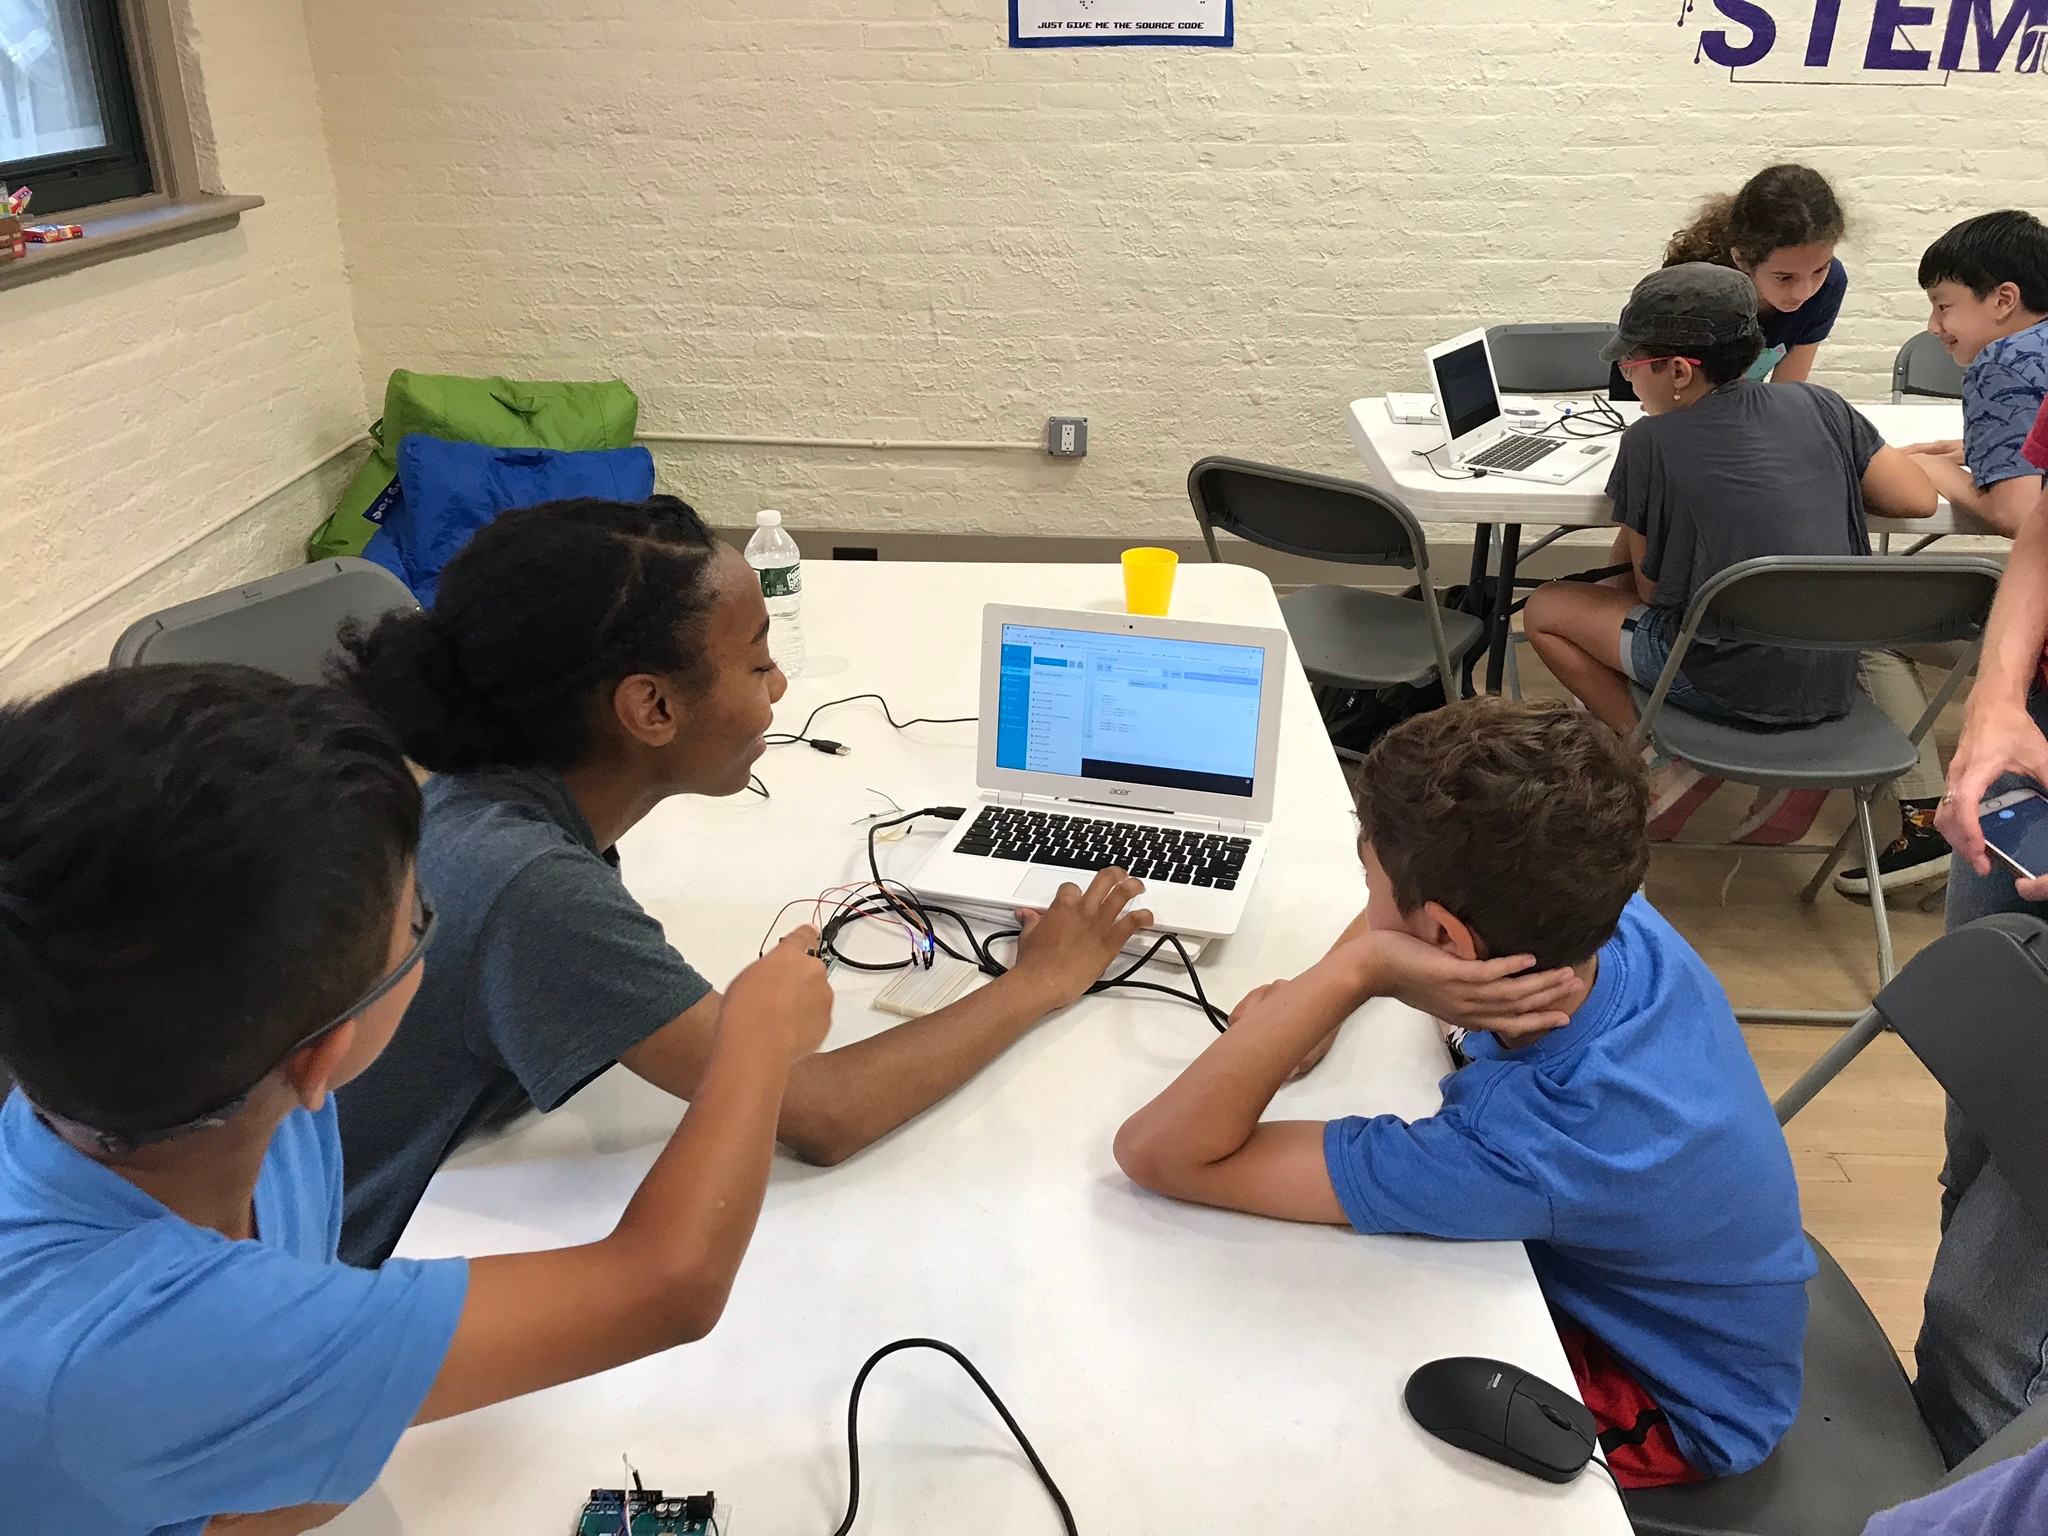 Kids working on on a computer in a group